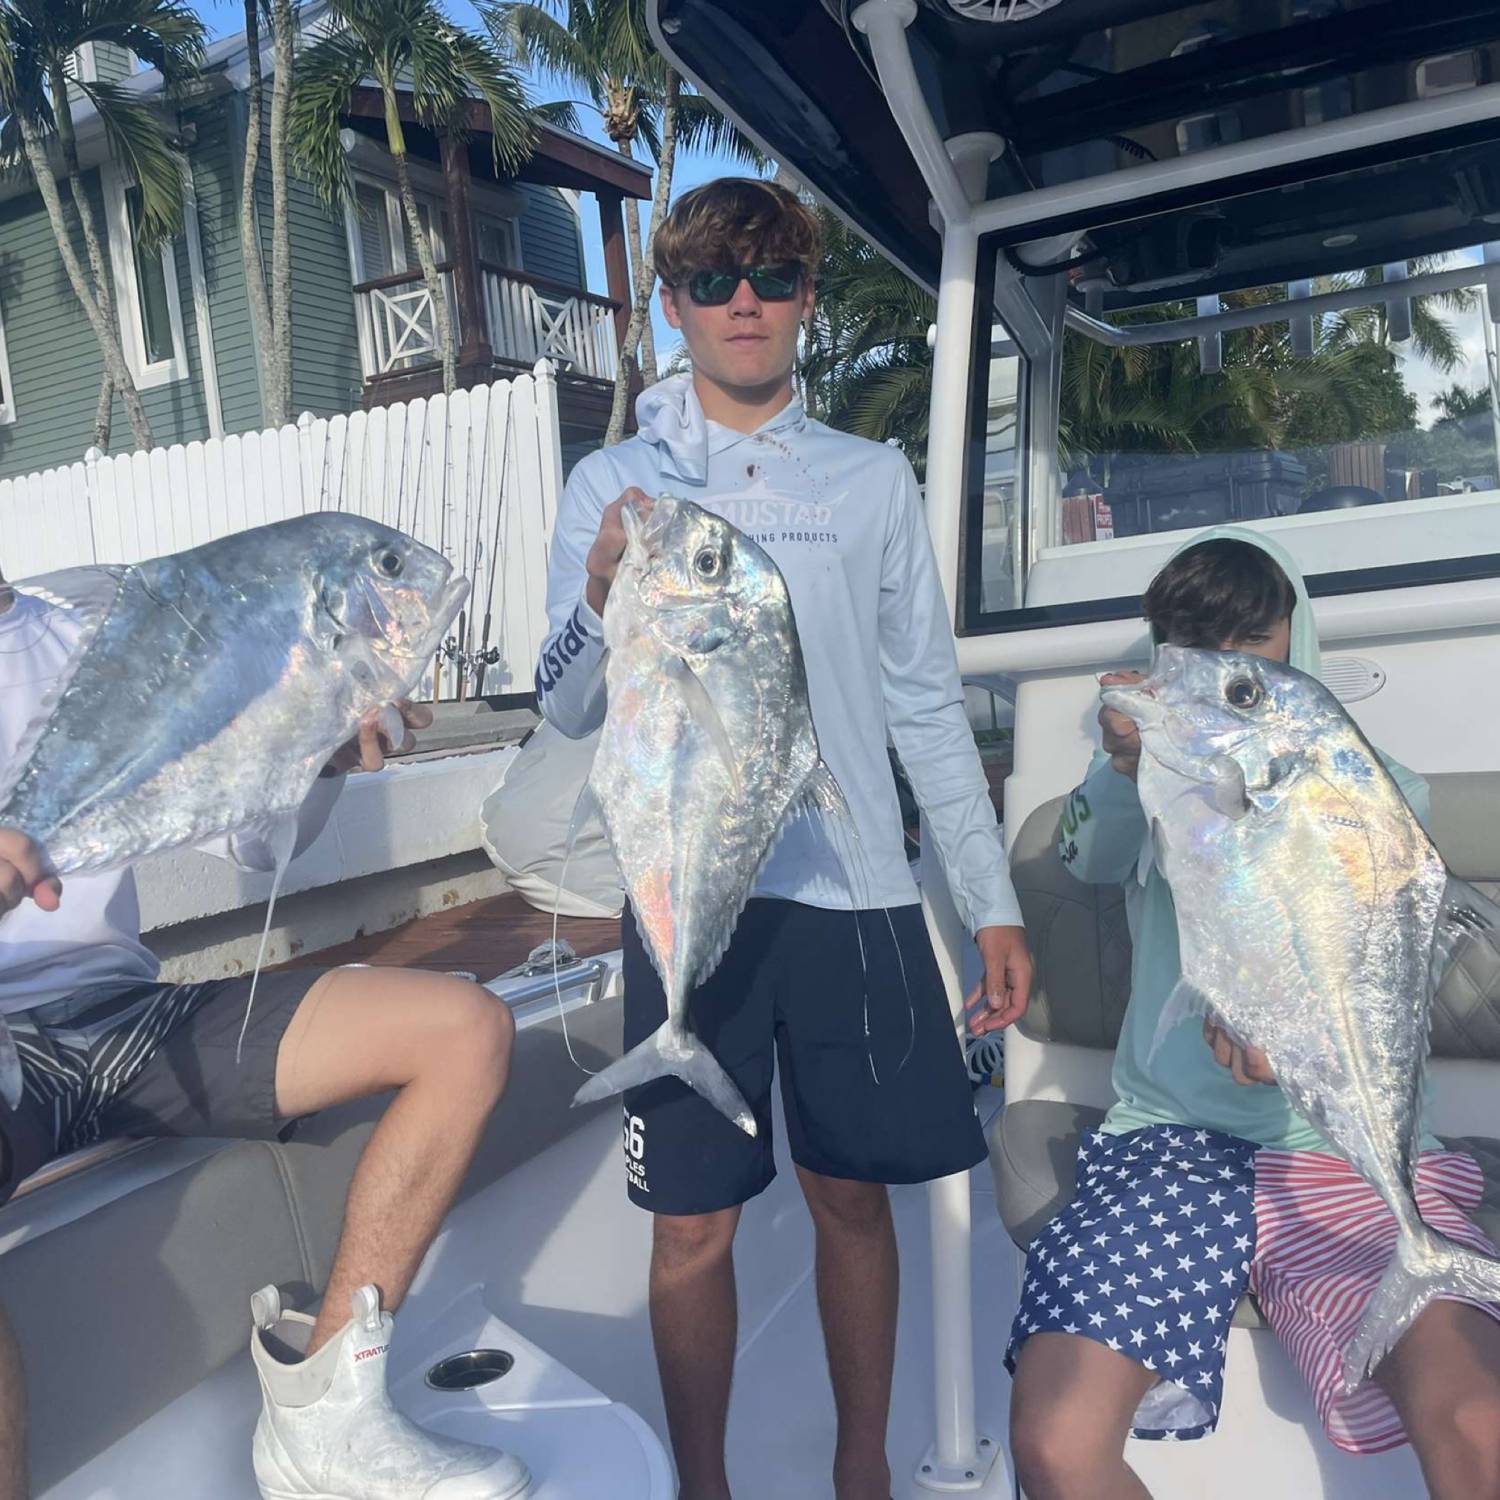 3 African Pompano caught off the coast of the Gulf of Mexico. Wonderful day of fishing overall,...